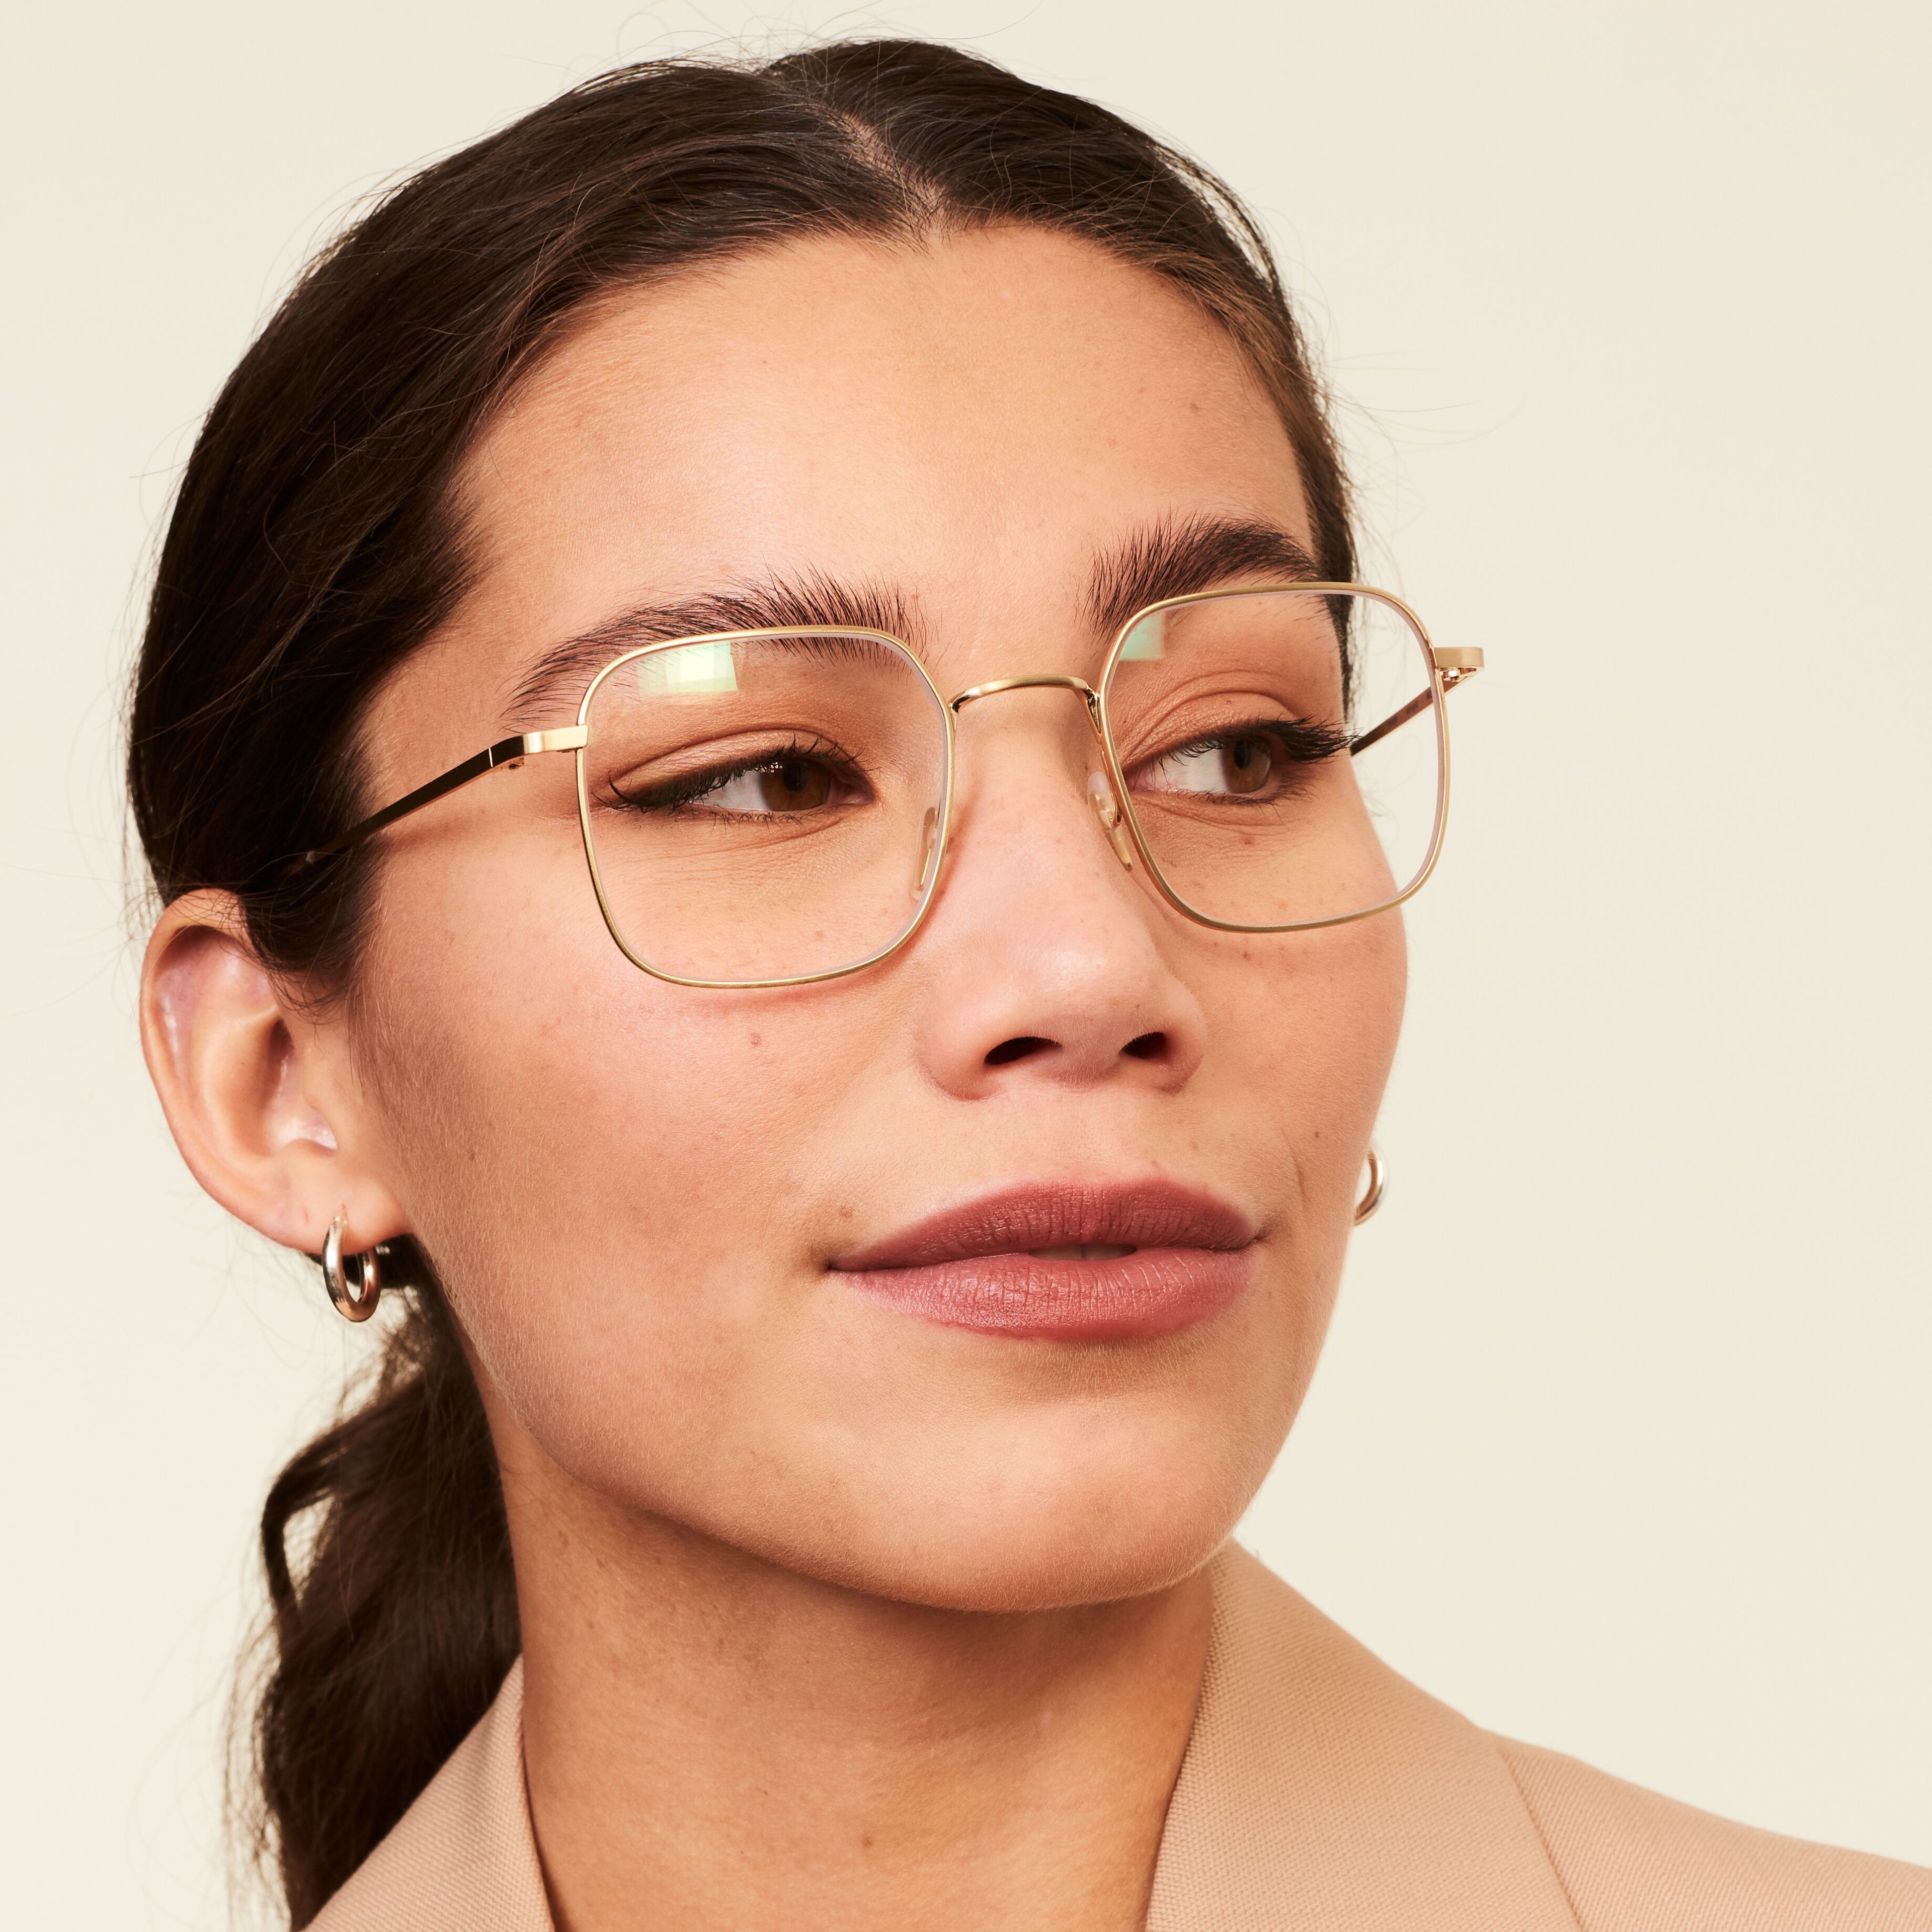 Ace & Tate Glasses |  Metal in Gold